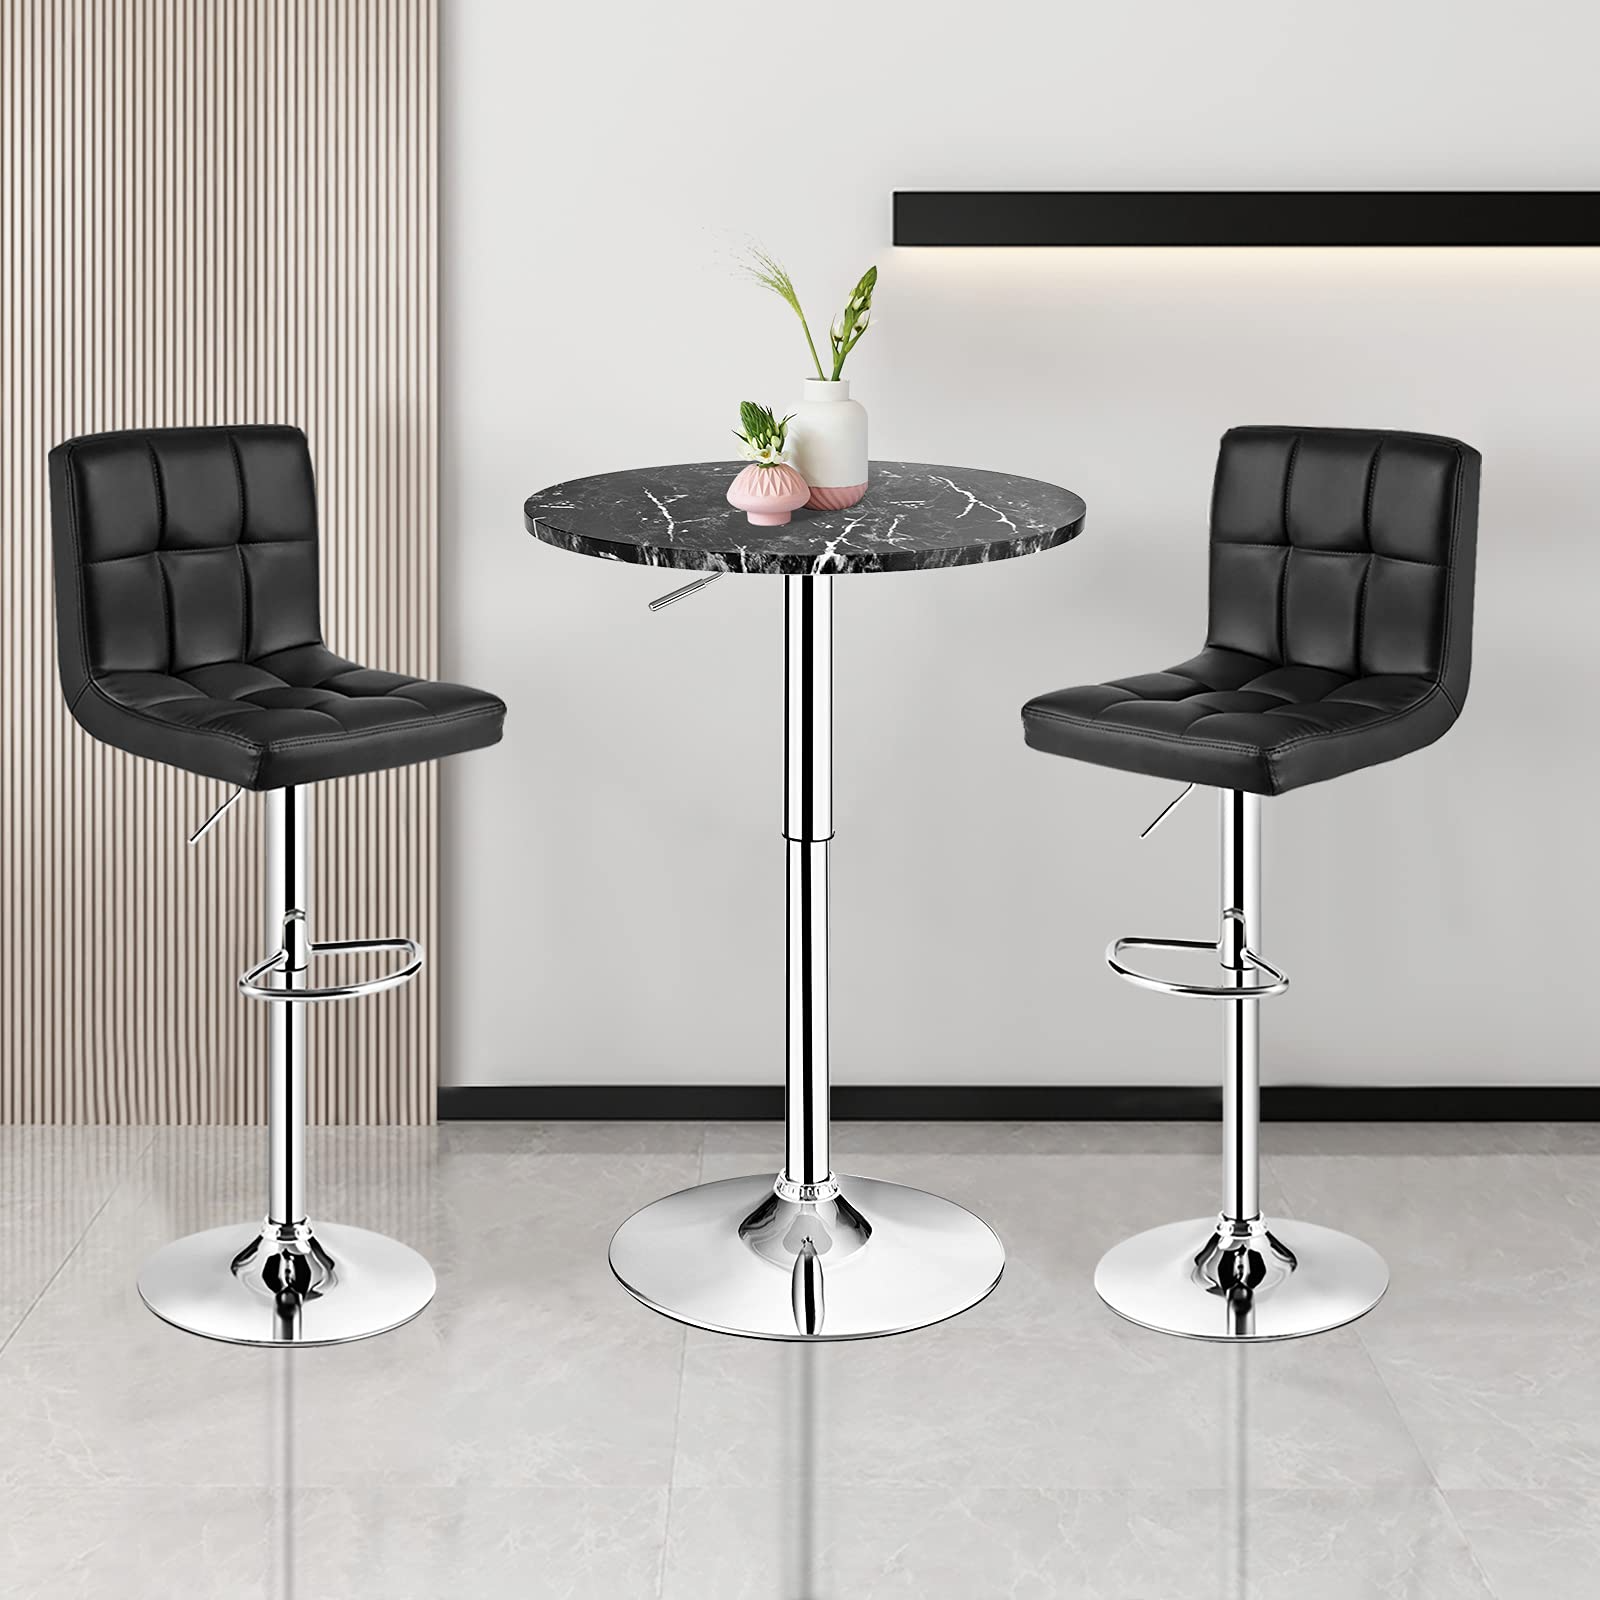 Giantex Round Pub Table Height Adjustable, 360 Degree Swivel Cocktail Pub Table with Sliver Leg and Base for Home, Office Bar Table